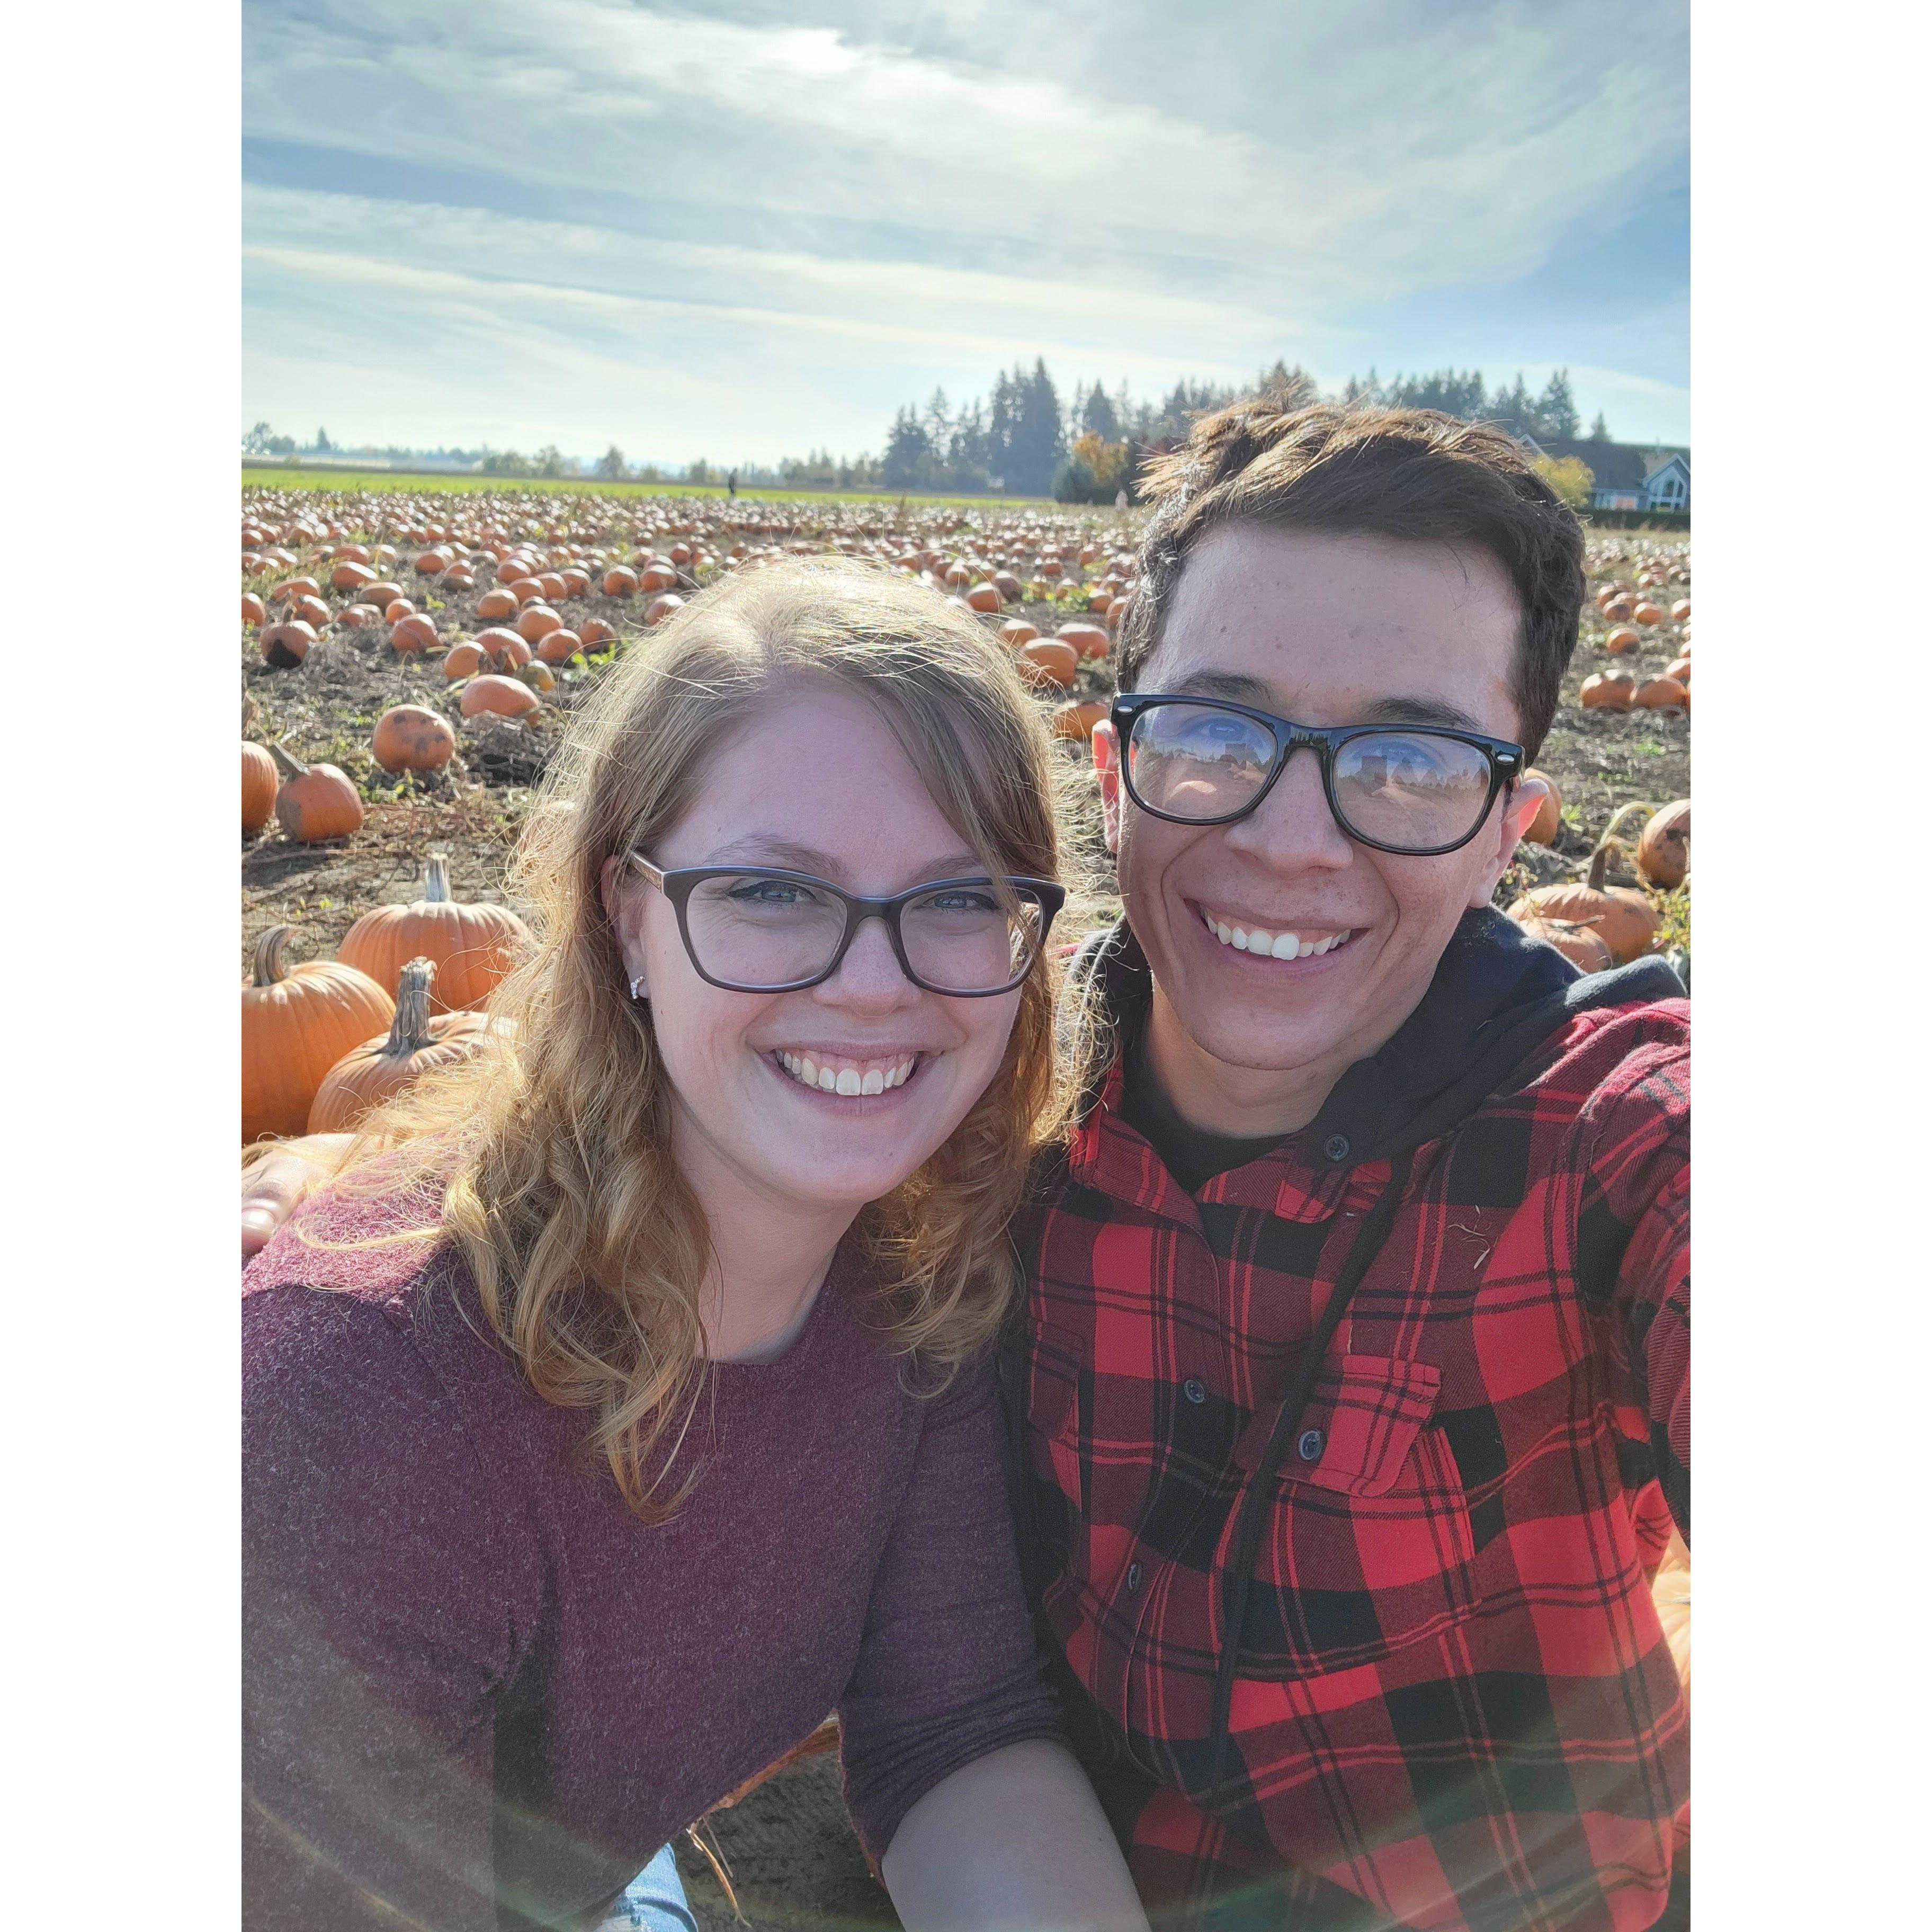 We go to a Pumpkin Patch every year - 2021